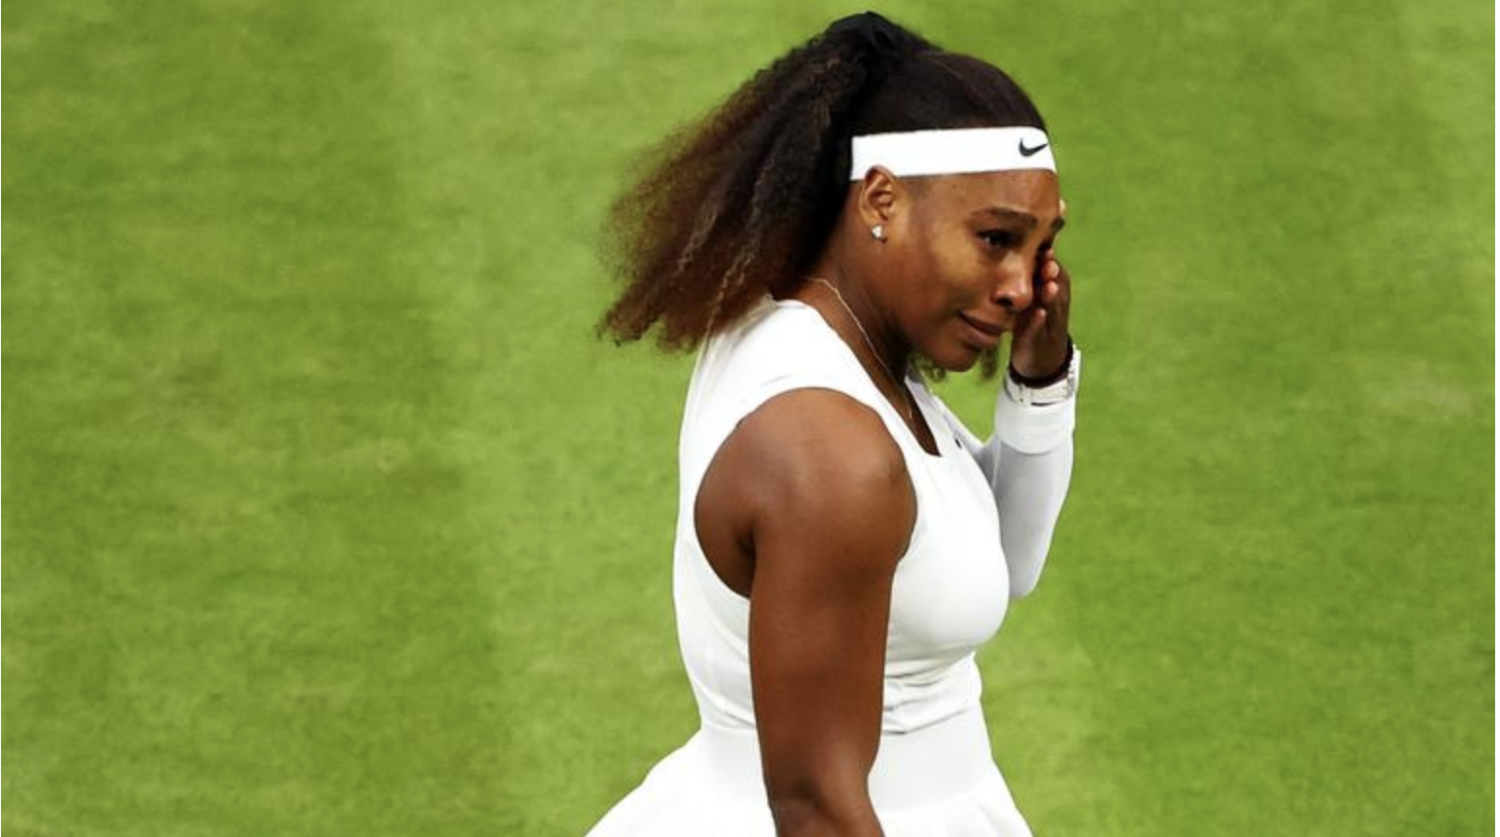 Serena Williams exits Wimbledon in 2021. Photo by Julian Finney/Getty Images.